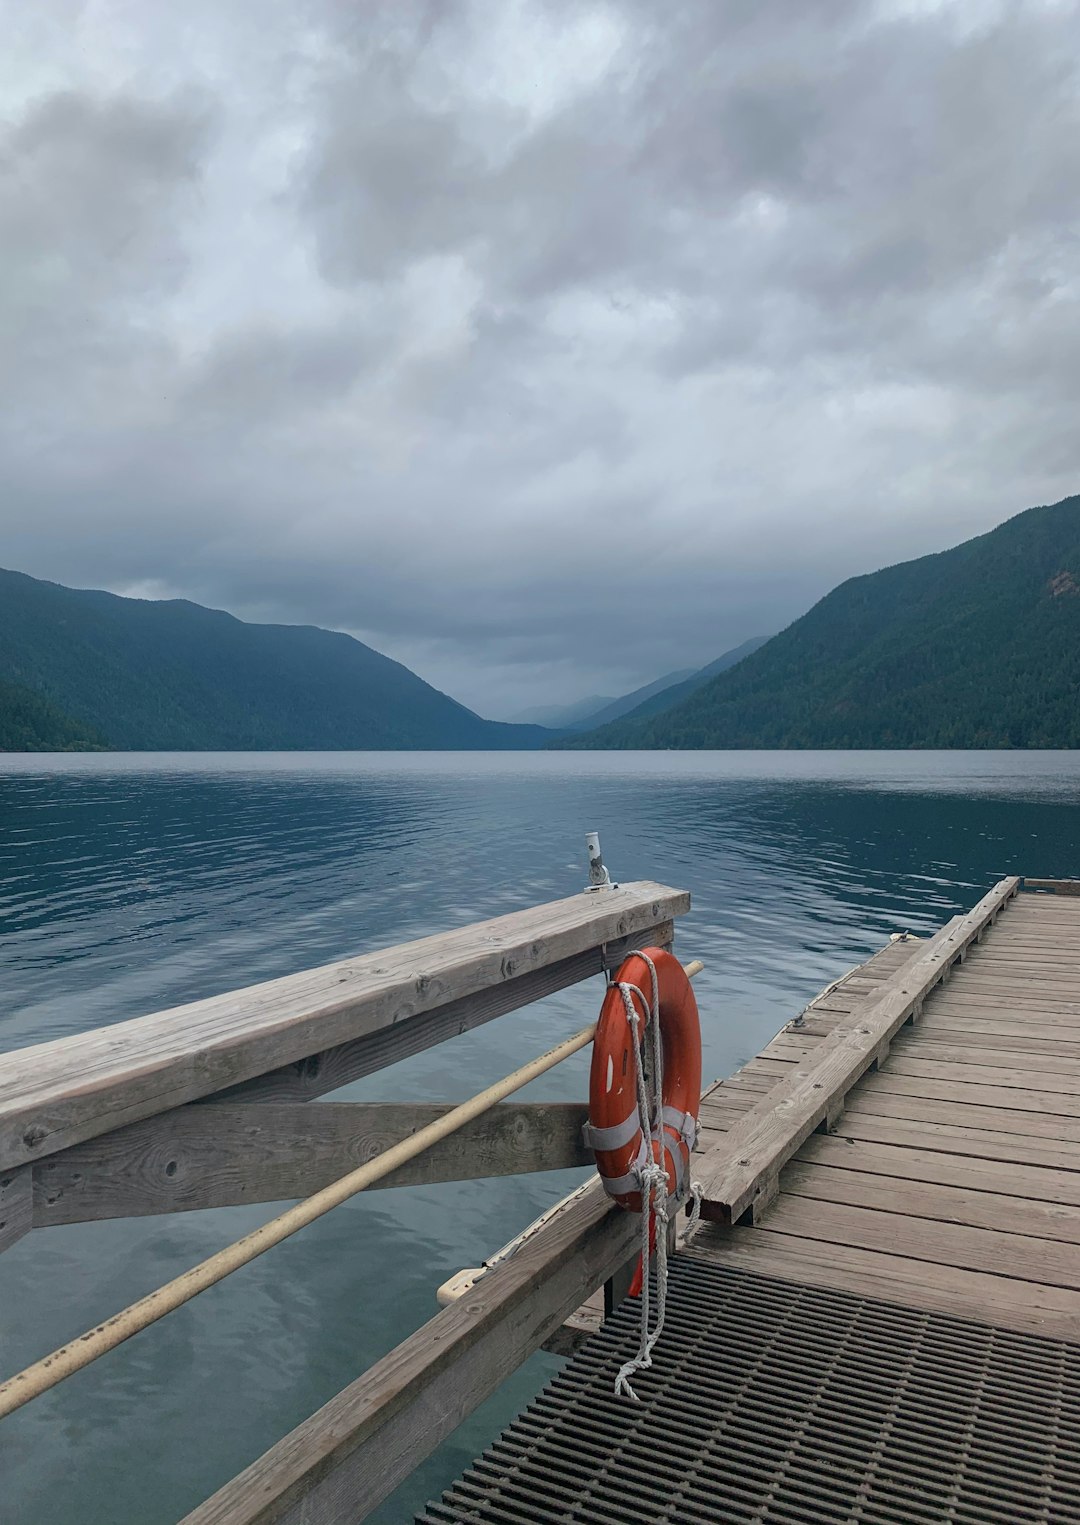 Travel Tips and Stories of Lake Crescent in United States